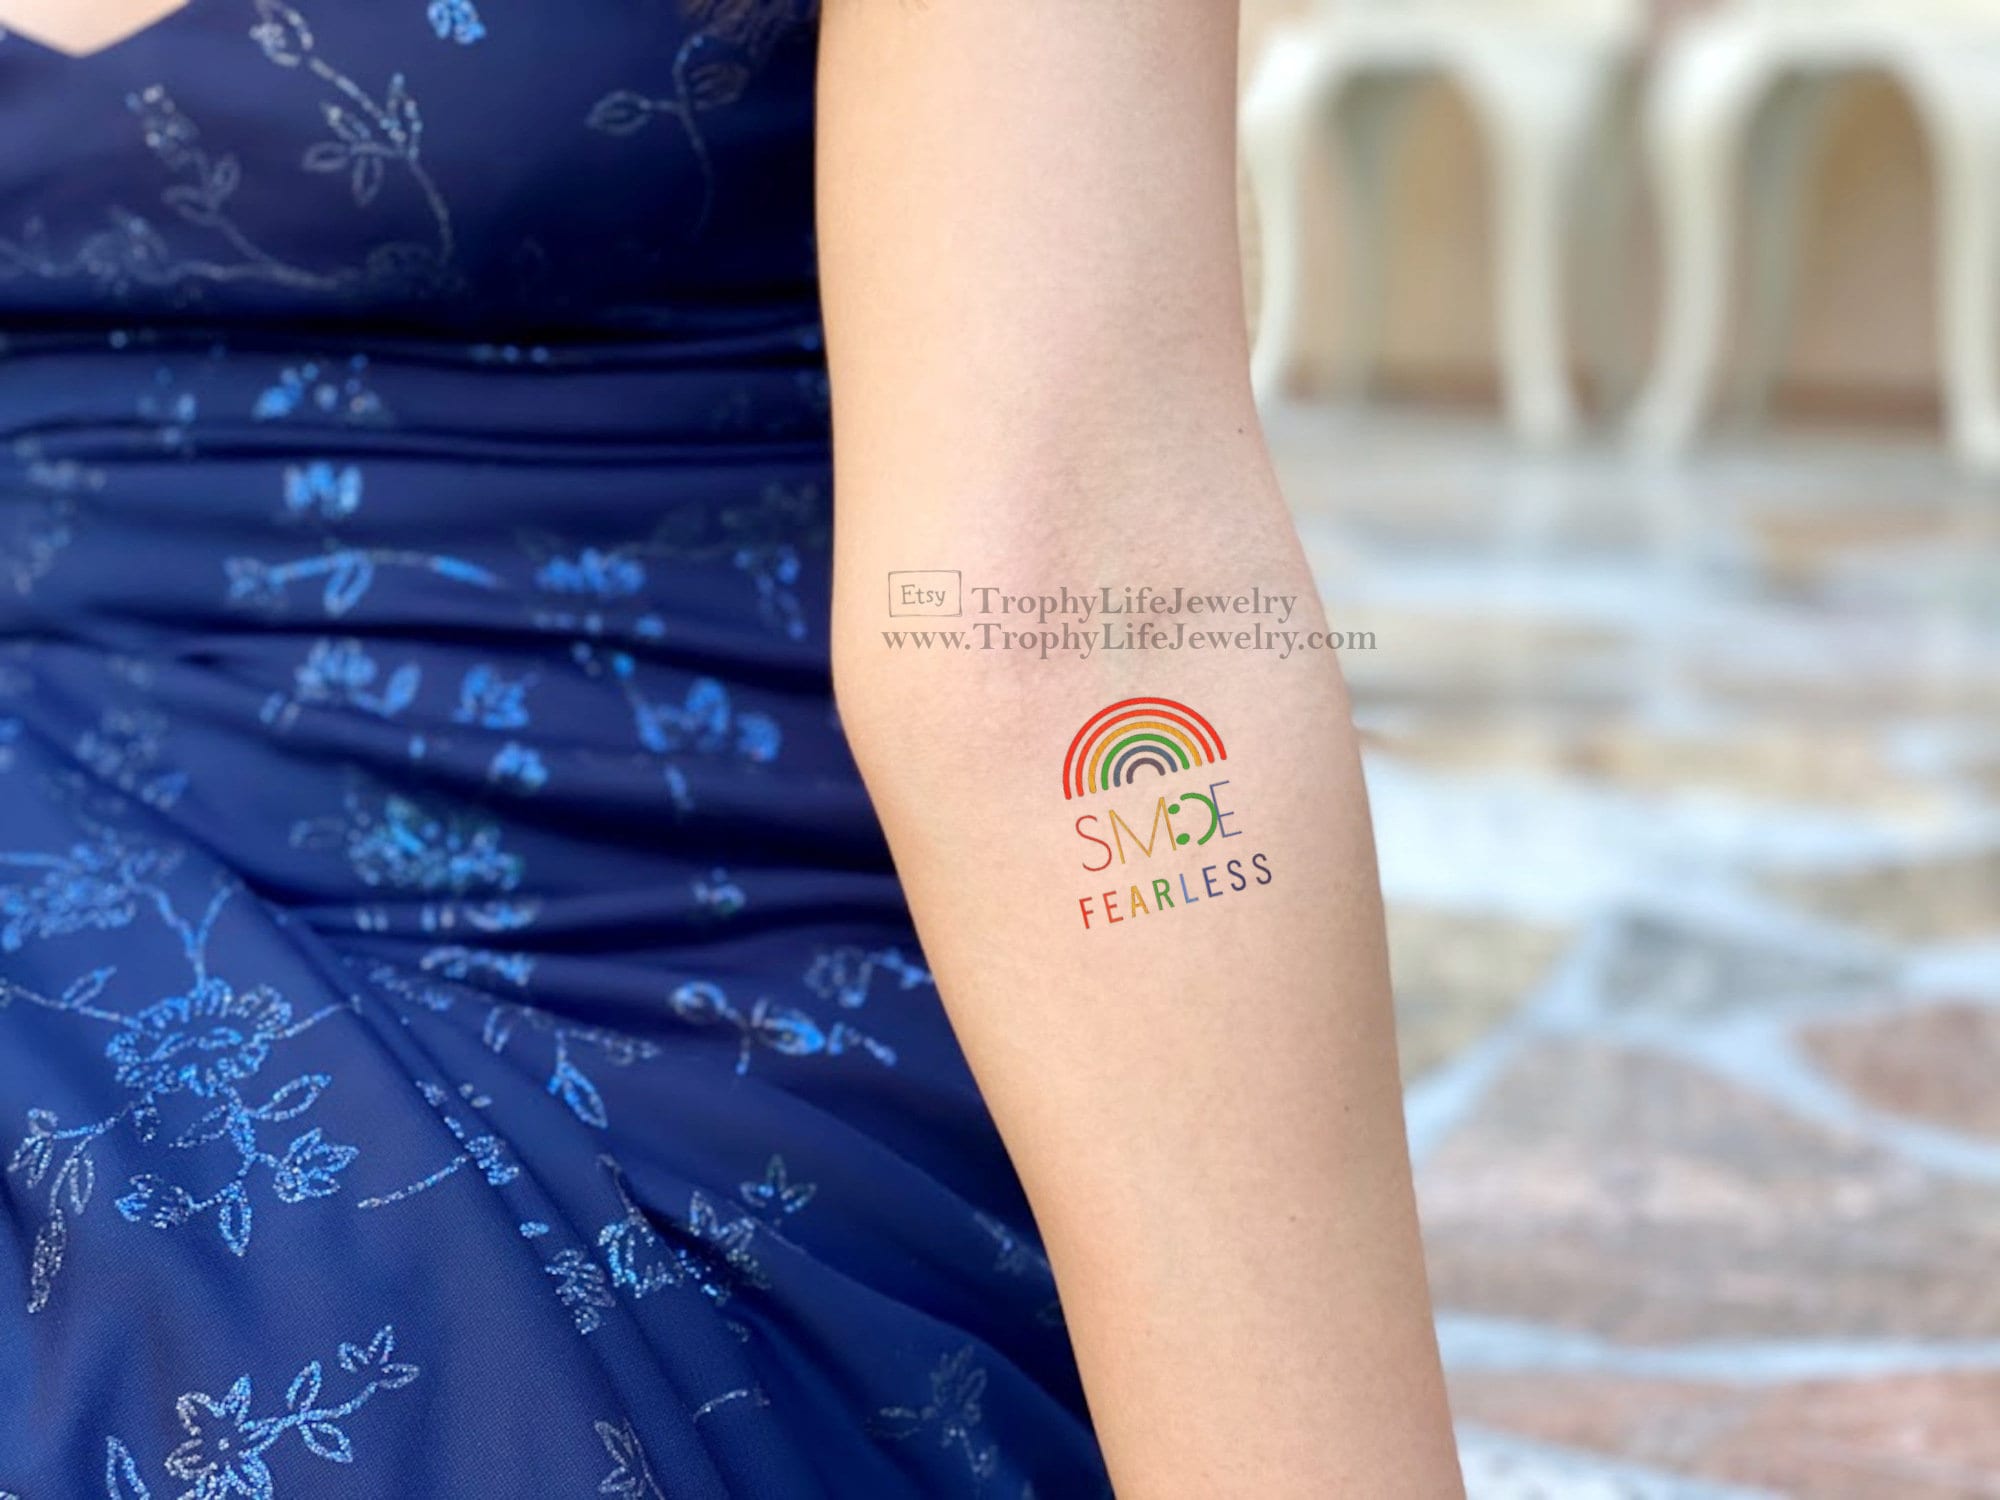 45 Rainbow Tattoos for the Colourful You